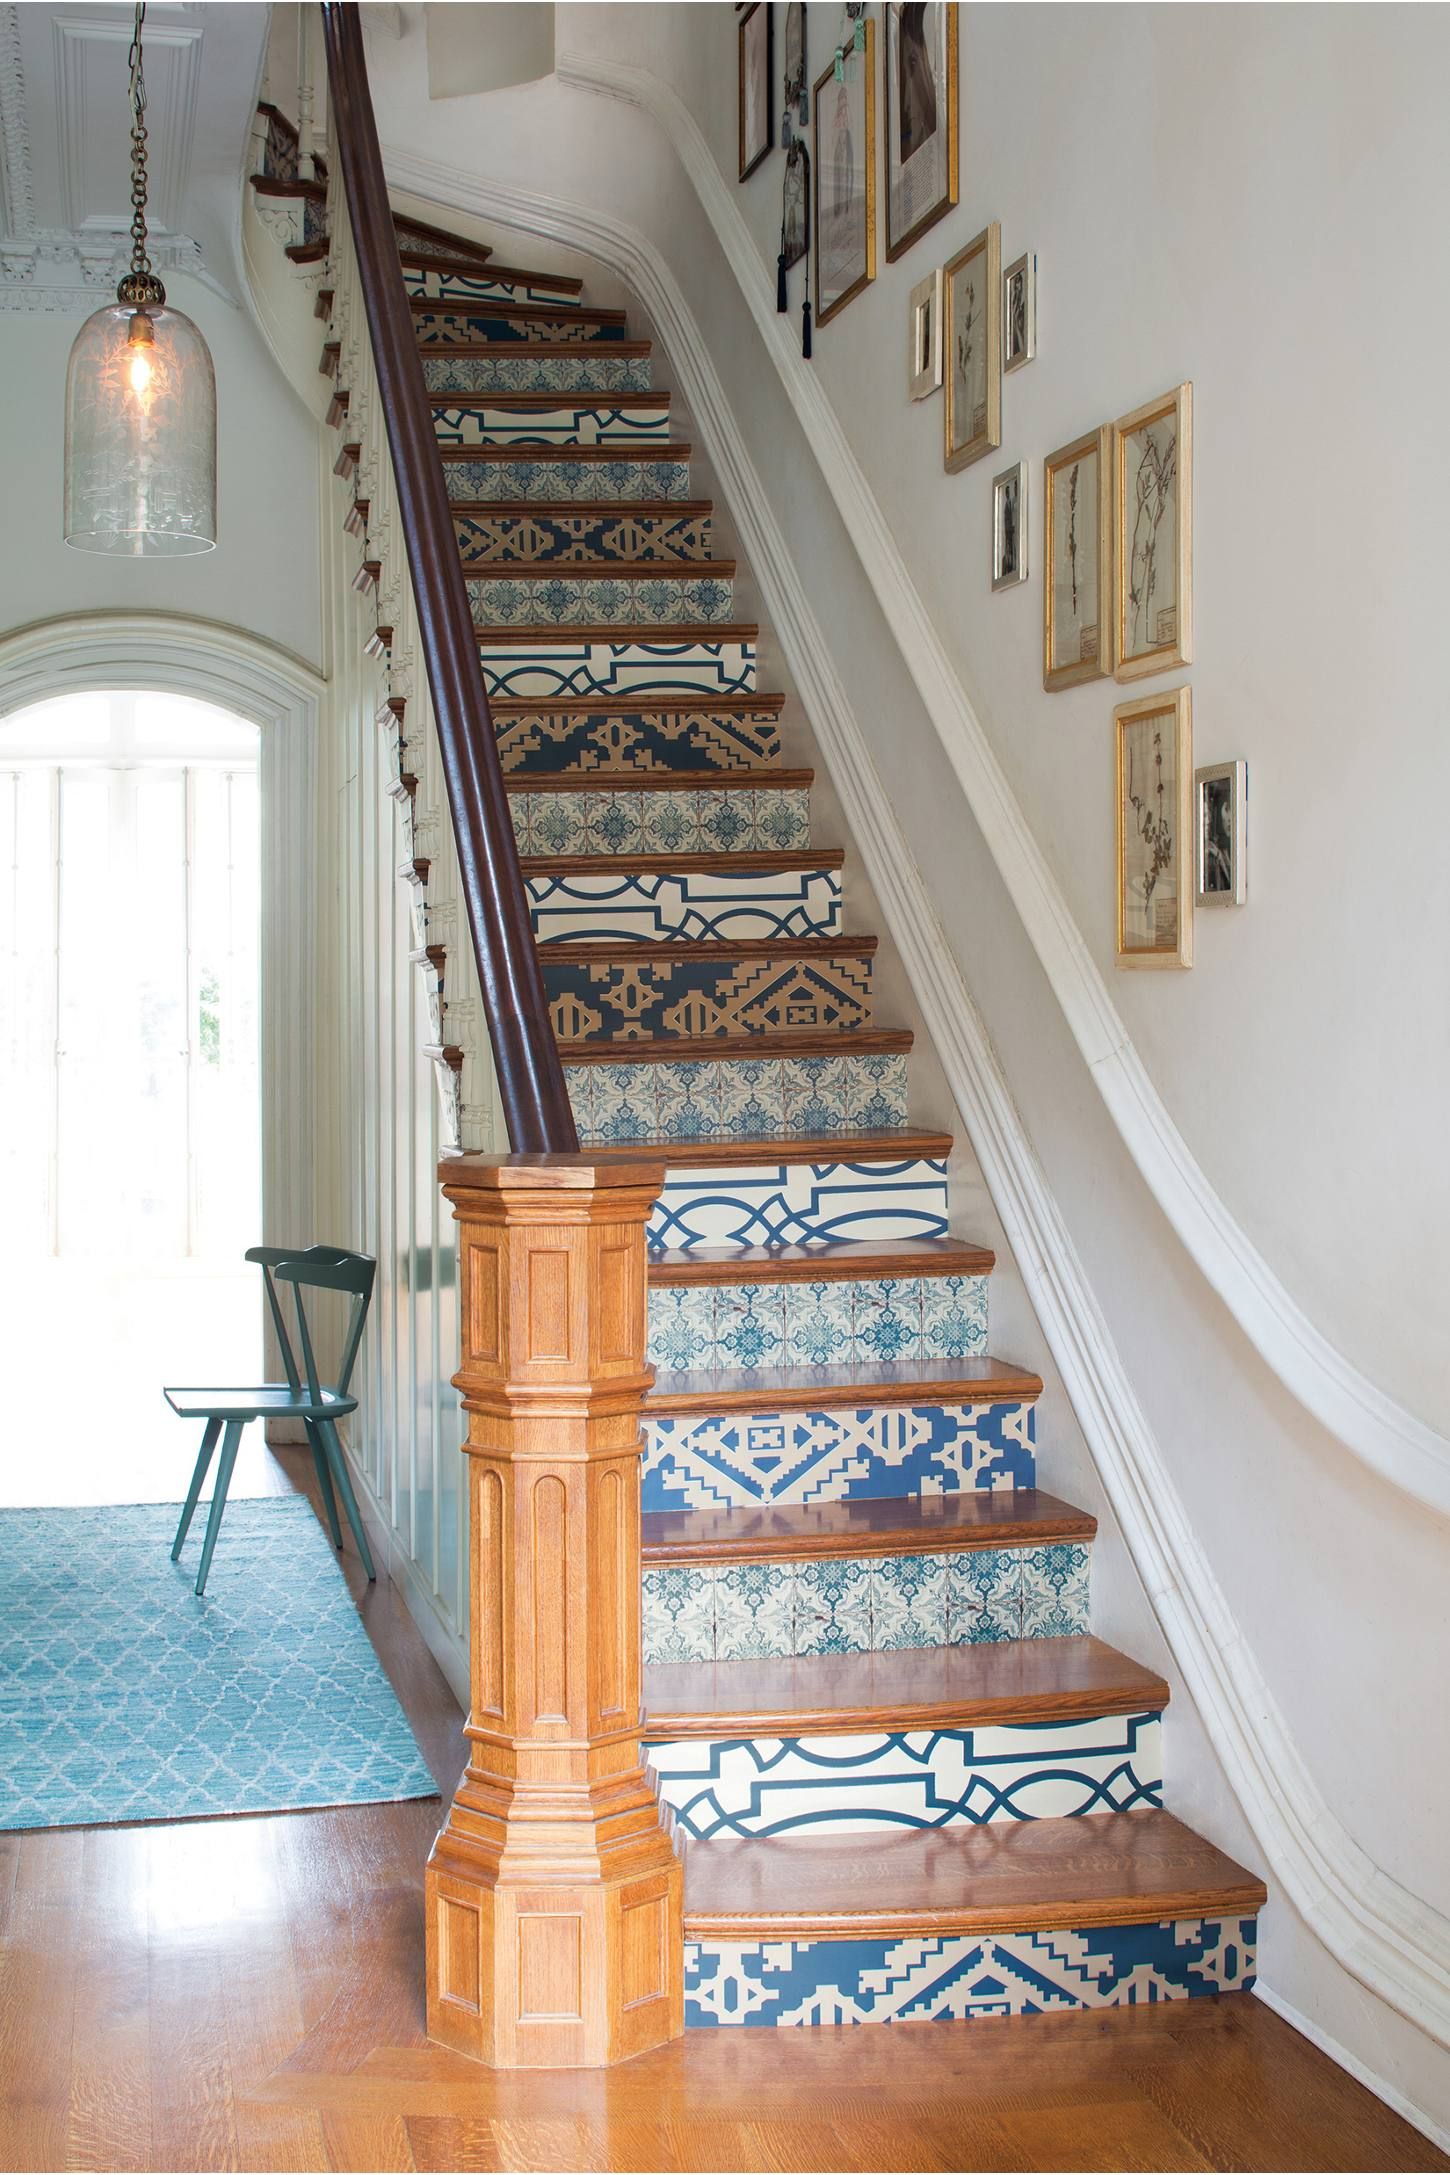 Guadala Wallpaper Tiled Staircase Stairs